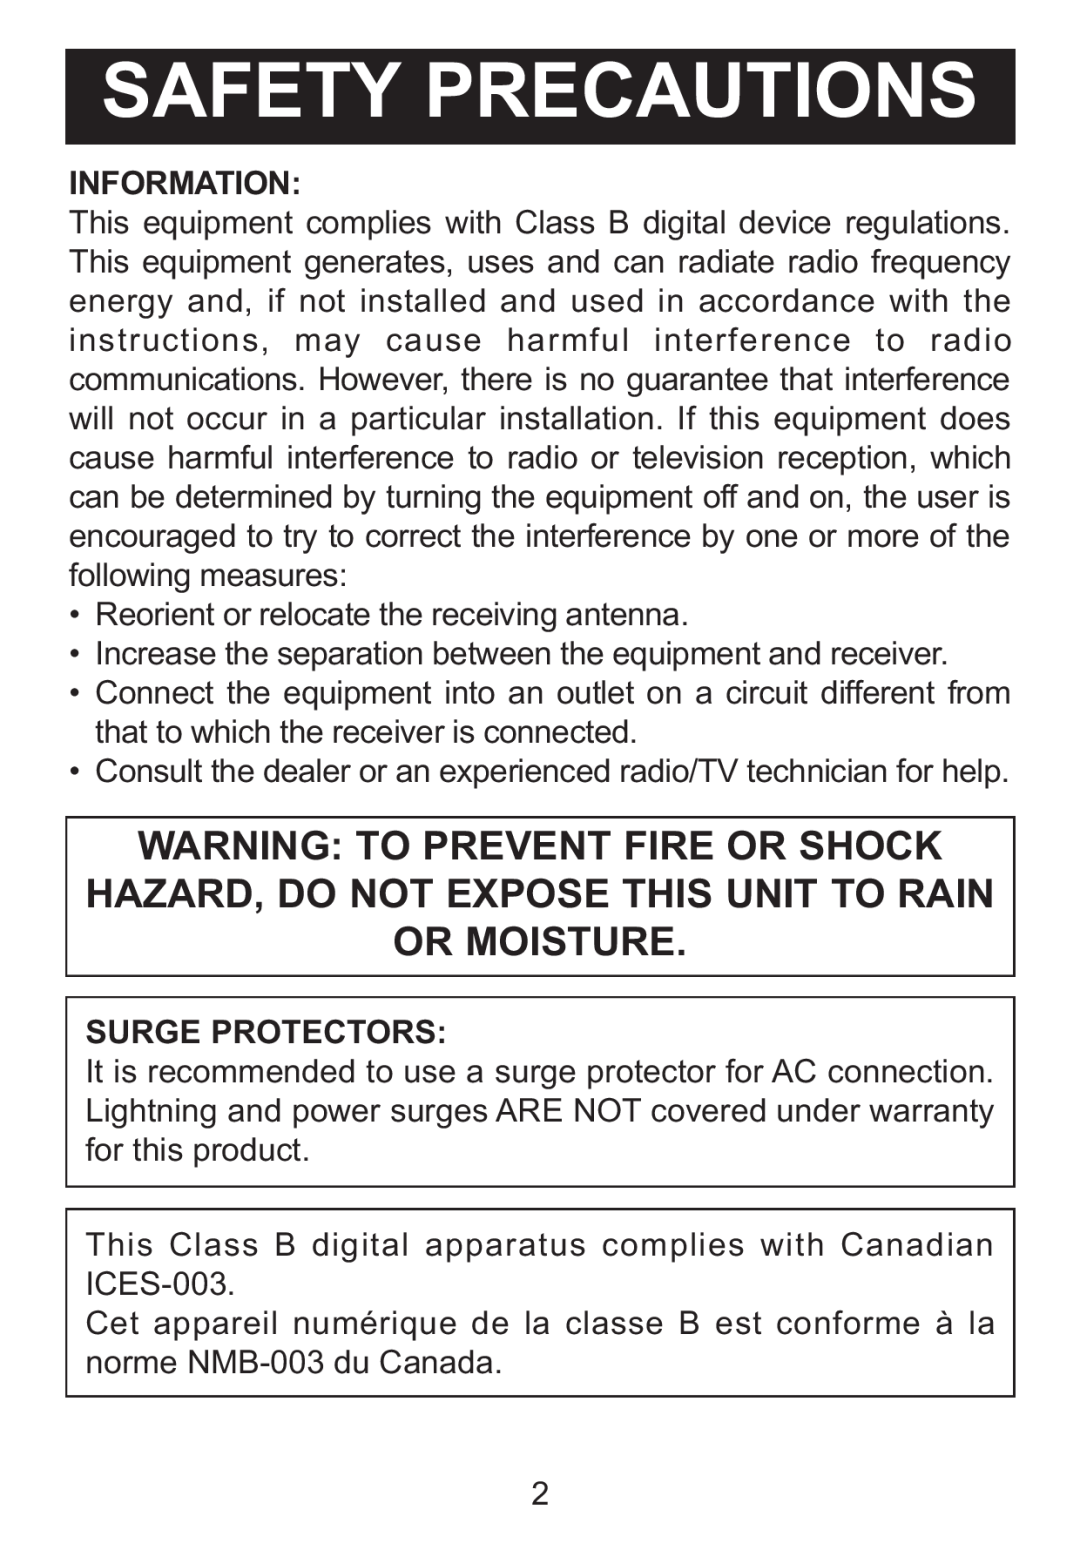 Memorex M12001 manual Information, Surge Protectors, Safety Precautions, Warning To Prevent Fire Or Shock 